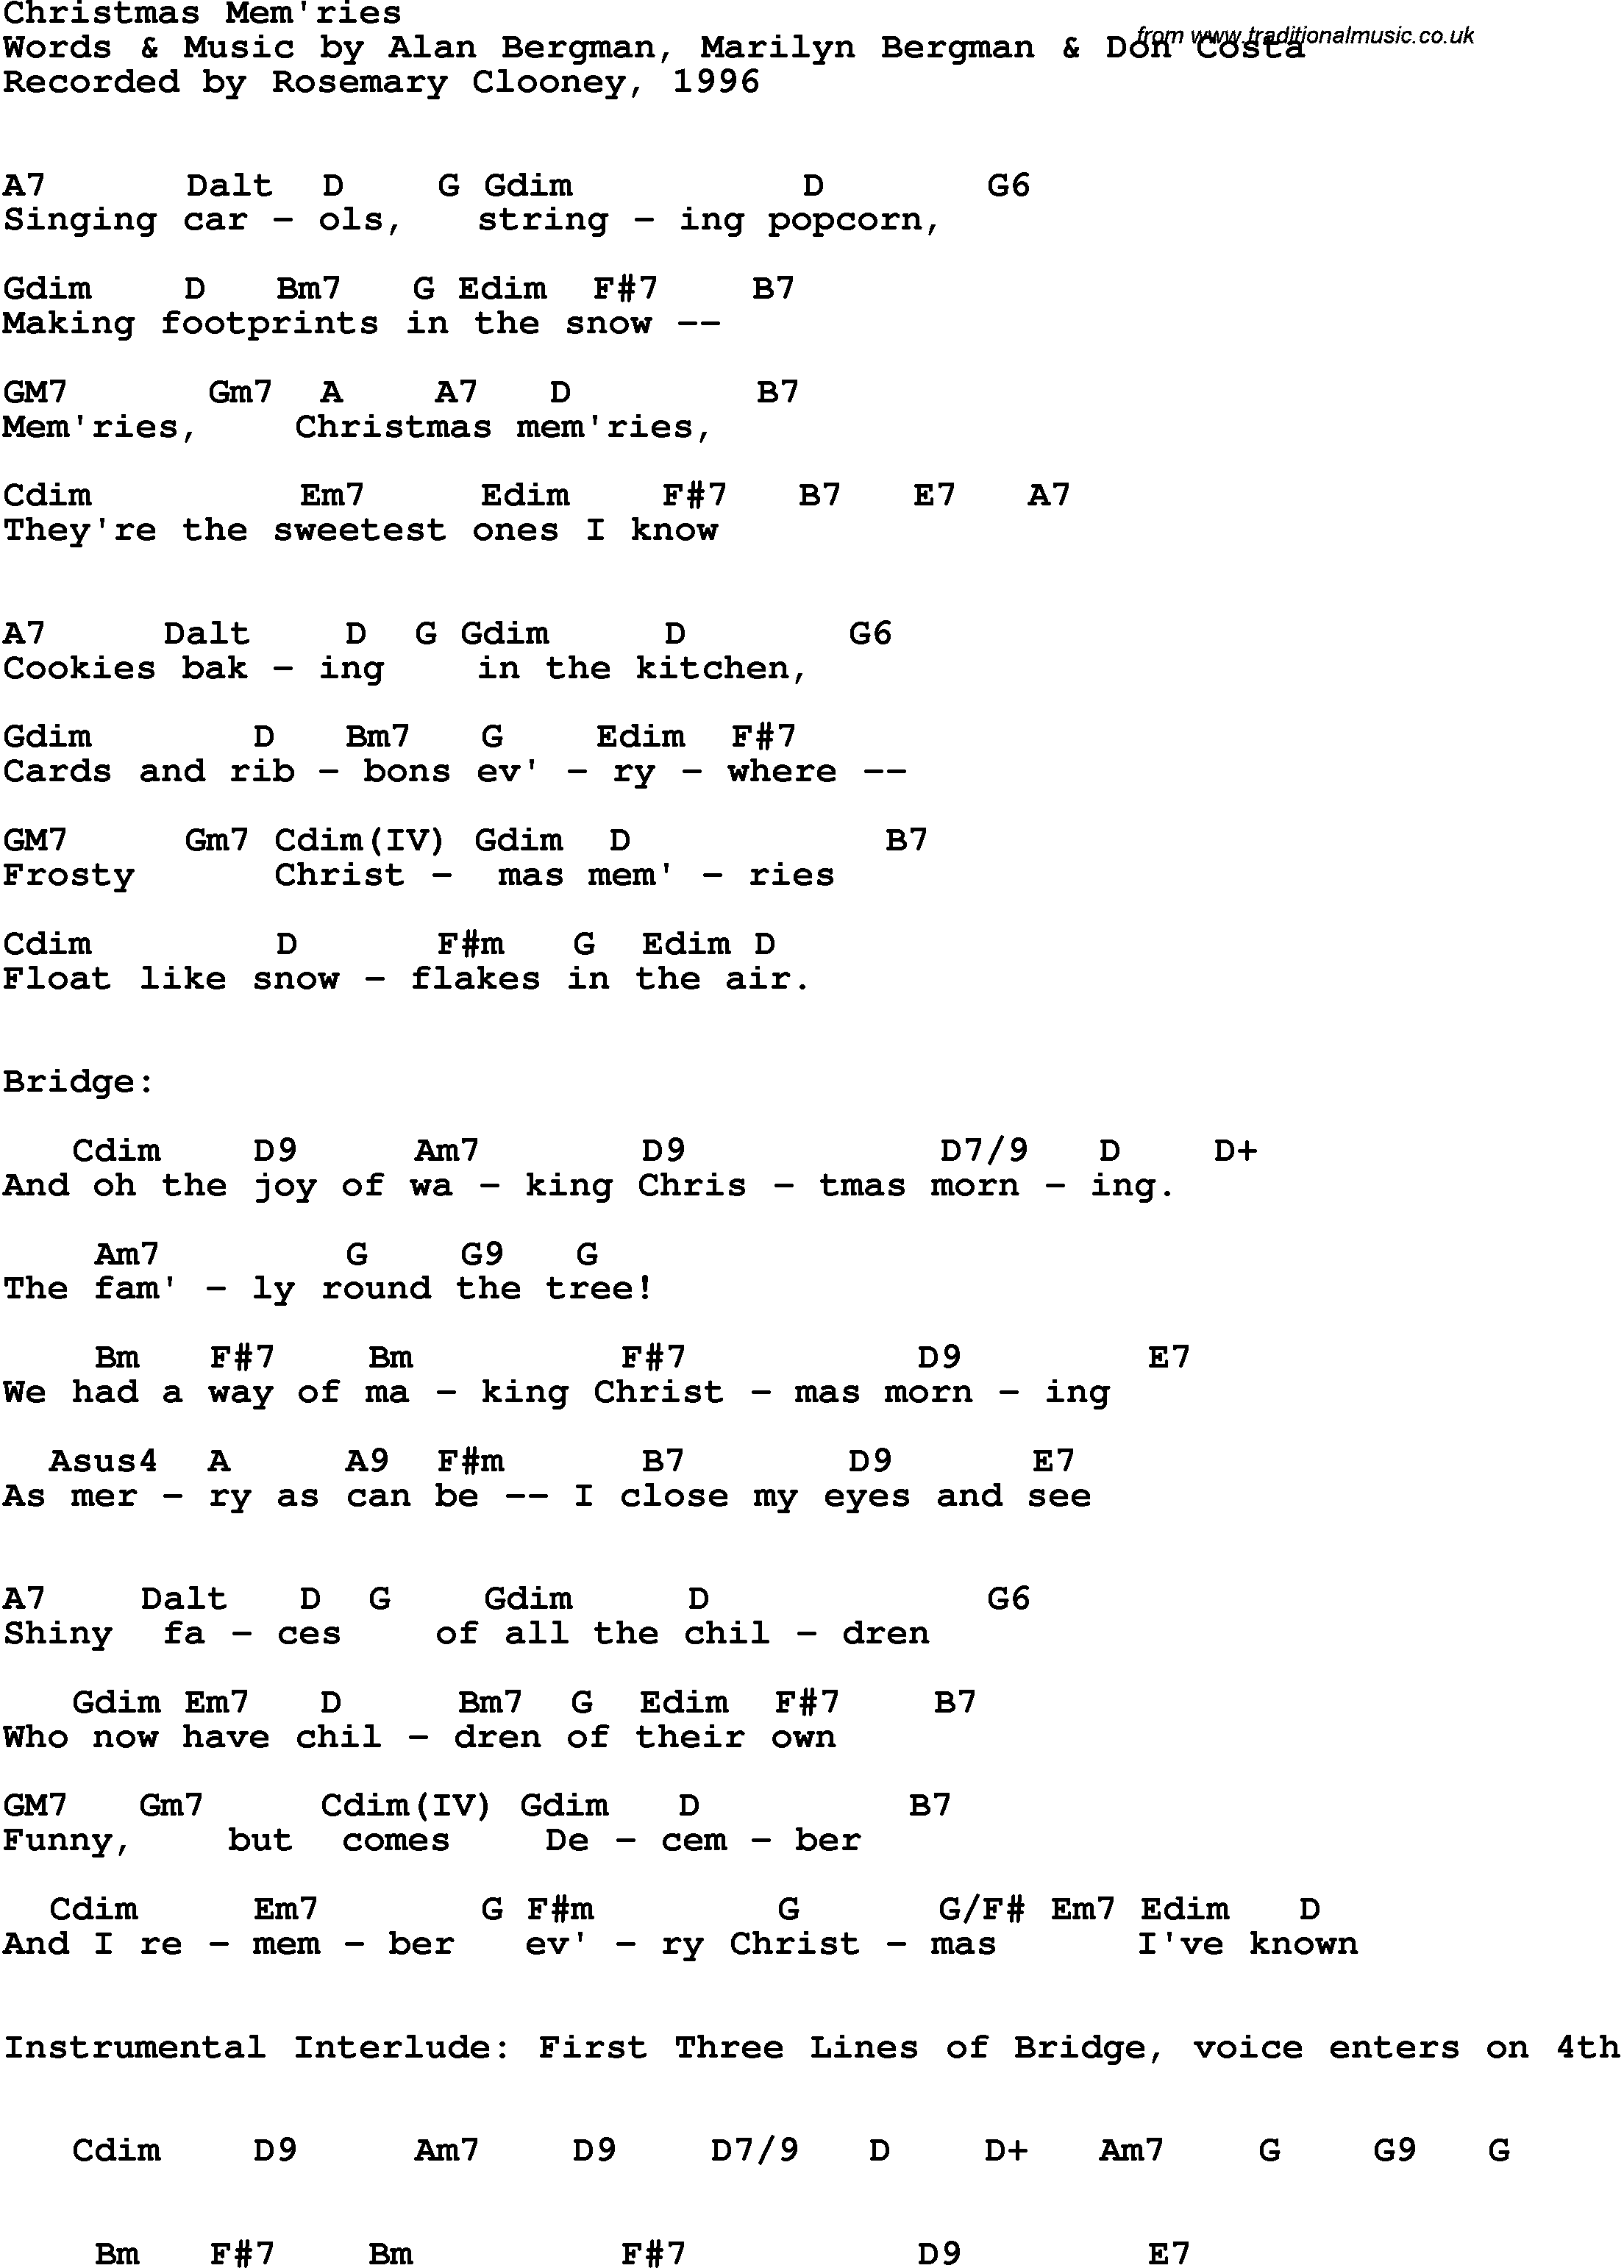 Song Lyrics with guitar chords for Christmas Mem'ries - Rosemary Clooney, 1996